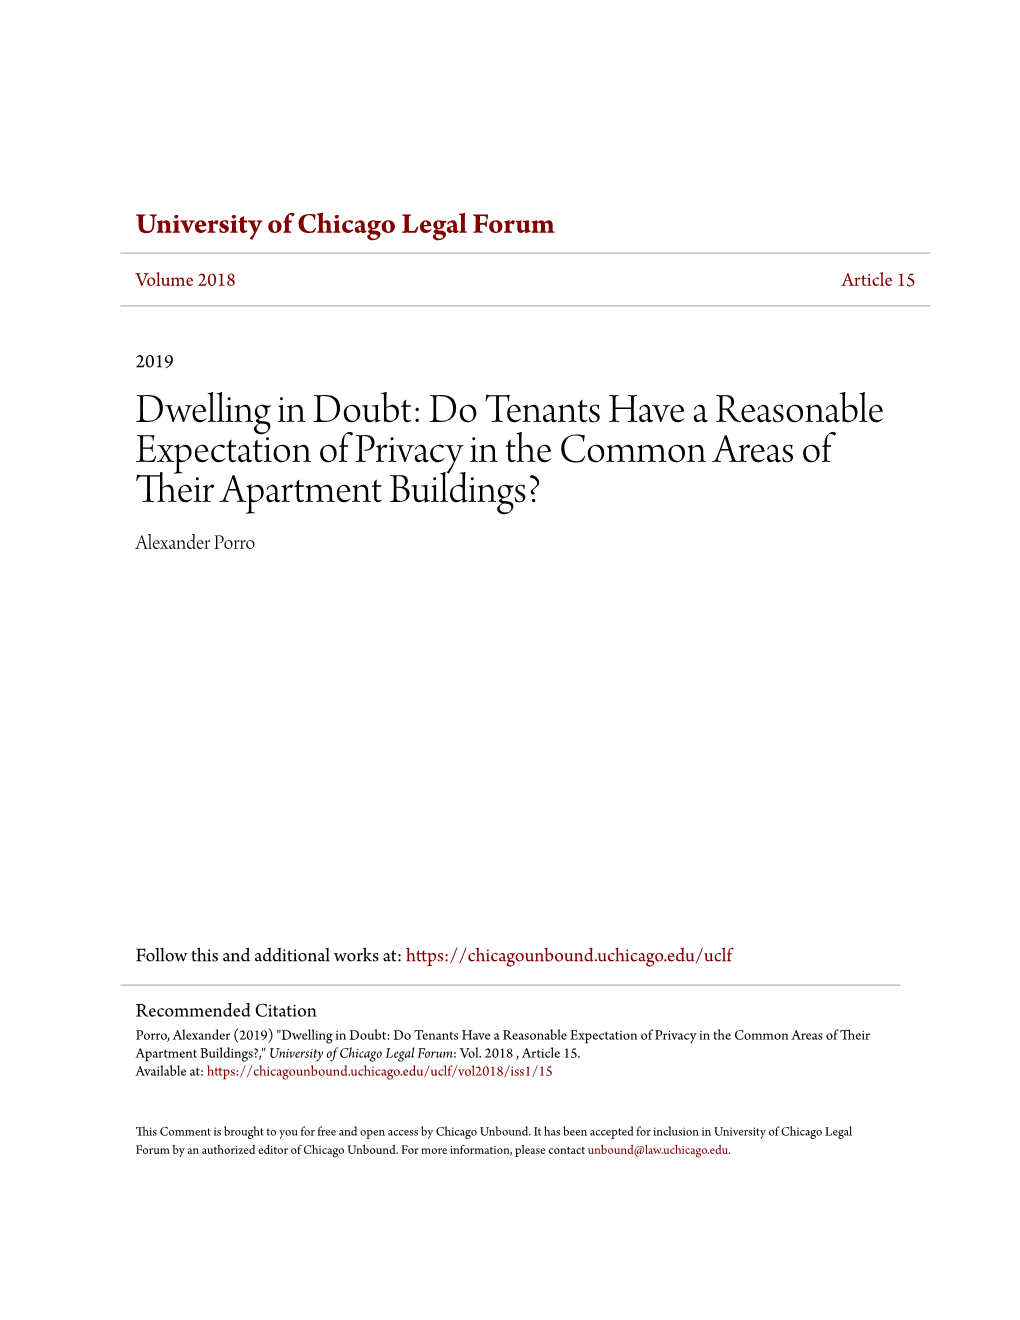 Do Tenants Have a Reasonable Expectation of Privacy in the Common Areas of Their Apartment Buildings? Alexander Porro